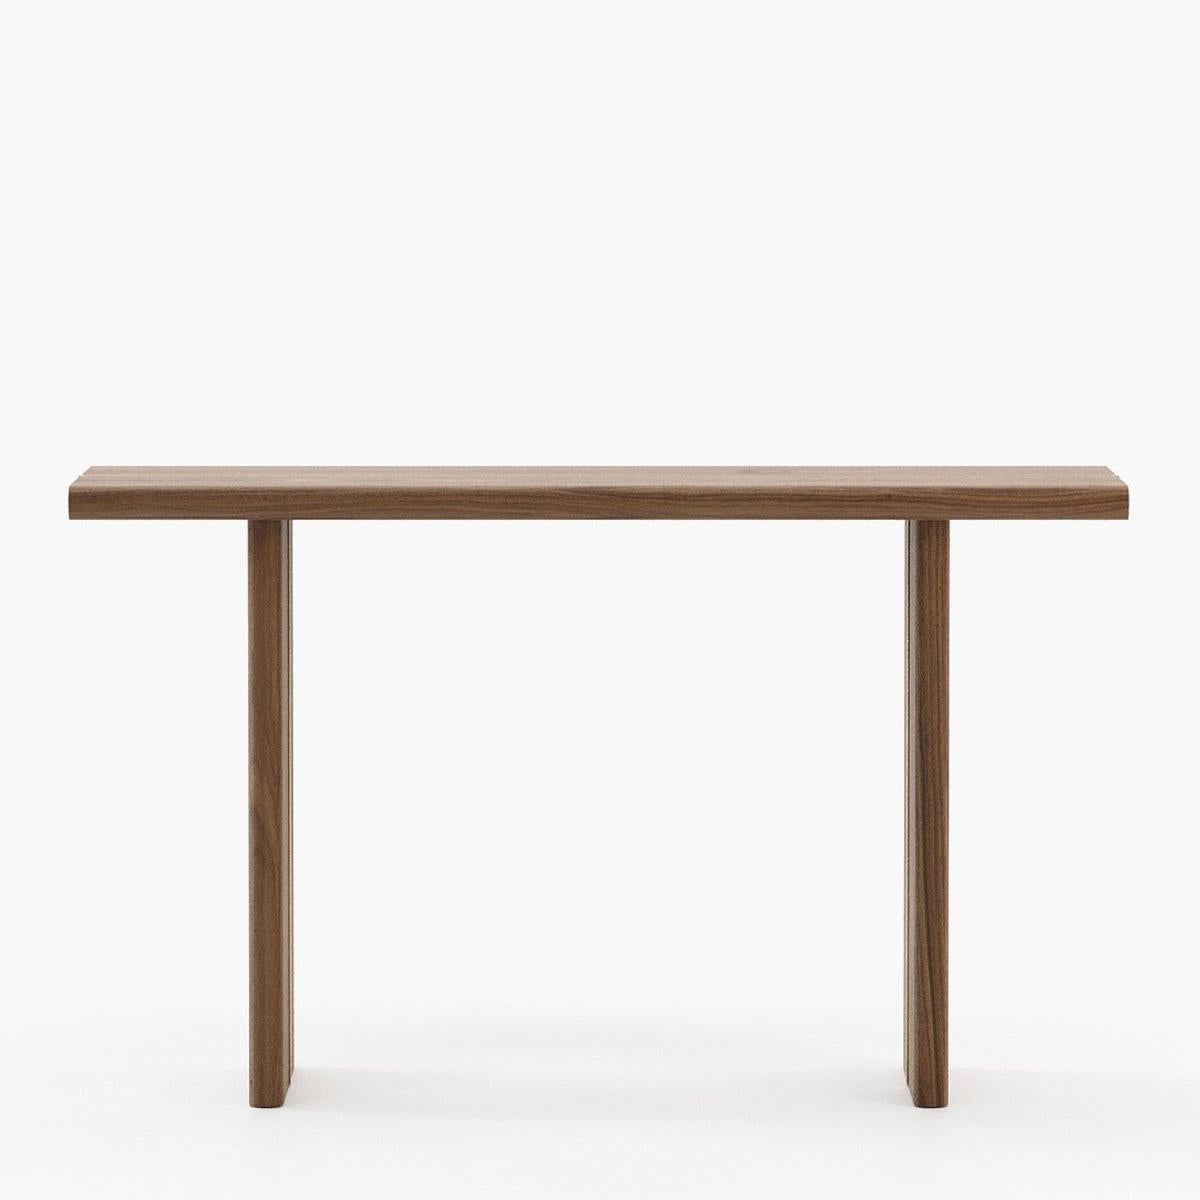 Console Table Arkanta with all structure in walnut wood veneered
with polished stainless steel trim in gold finish.
Also available on request in grey oak matte, or in natural oak, or in
ebony matte finish.